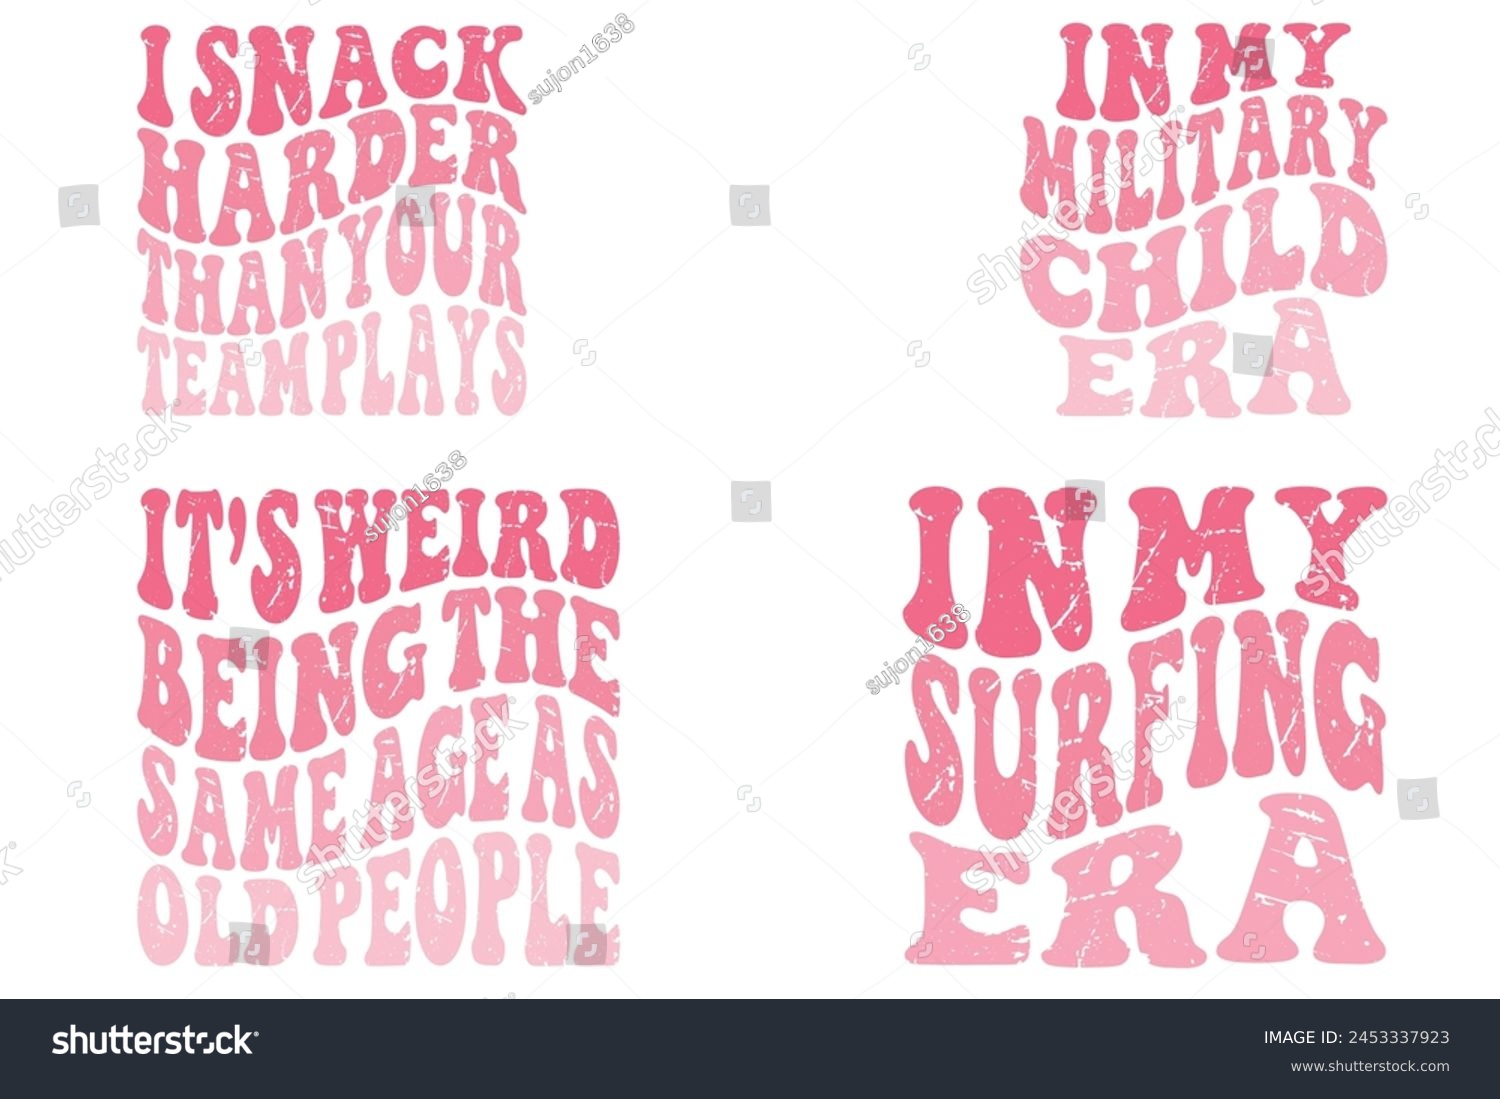 SVG of I Snack Harder Than Your Team Plays, In My Military Child Era, It's Weird Being the Same age as old People, In My Surfing Era retro T-shirt svg